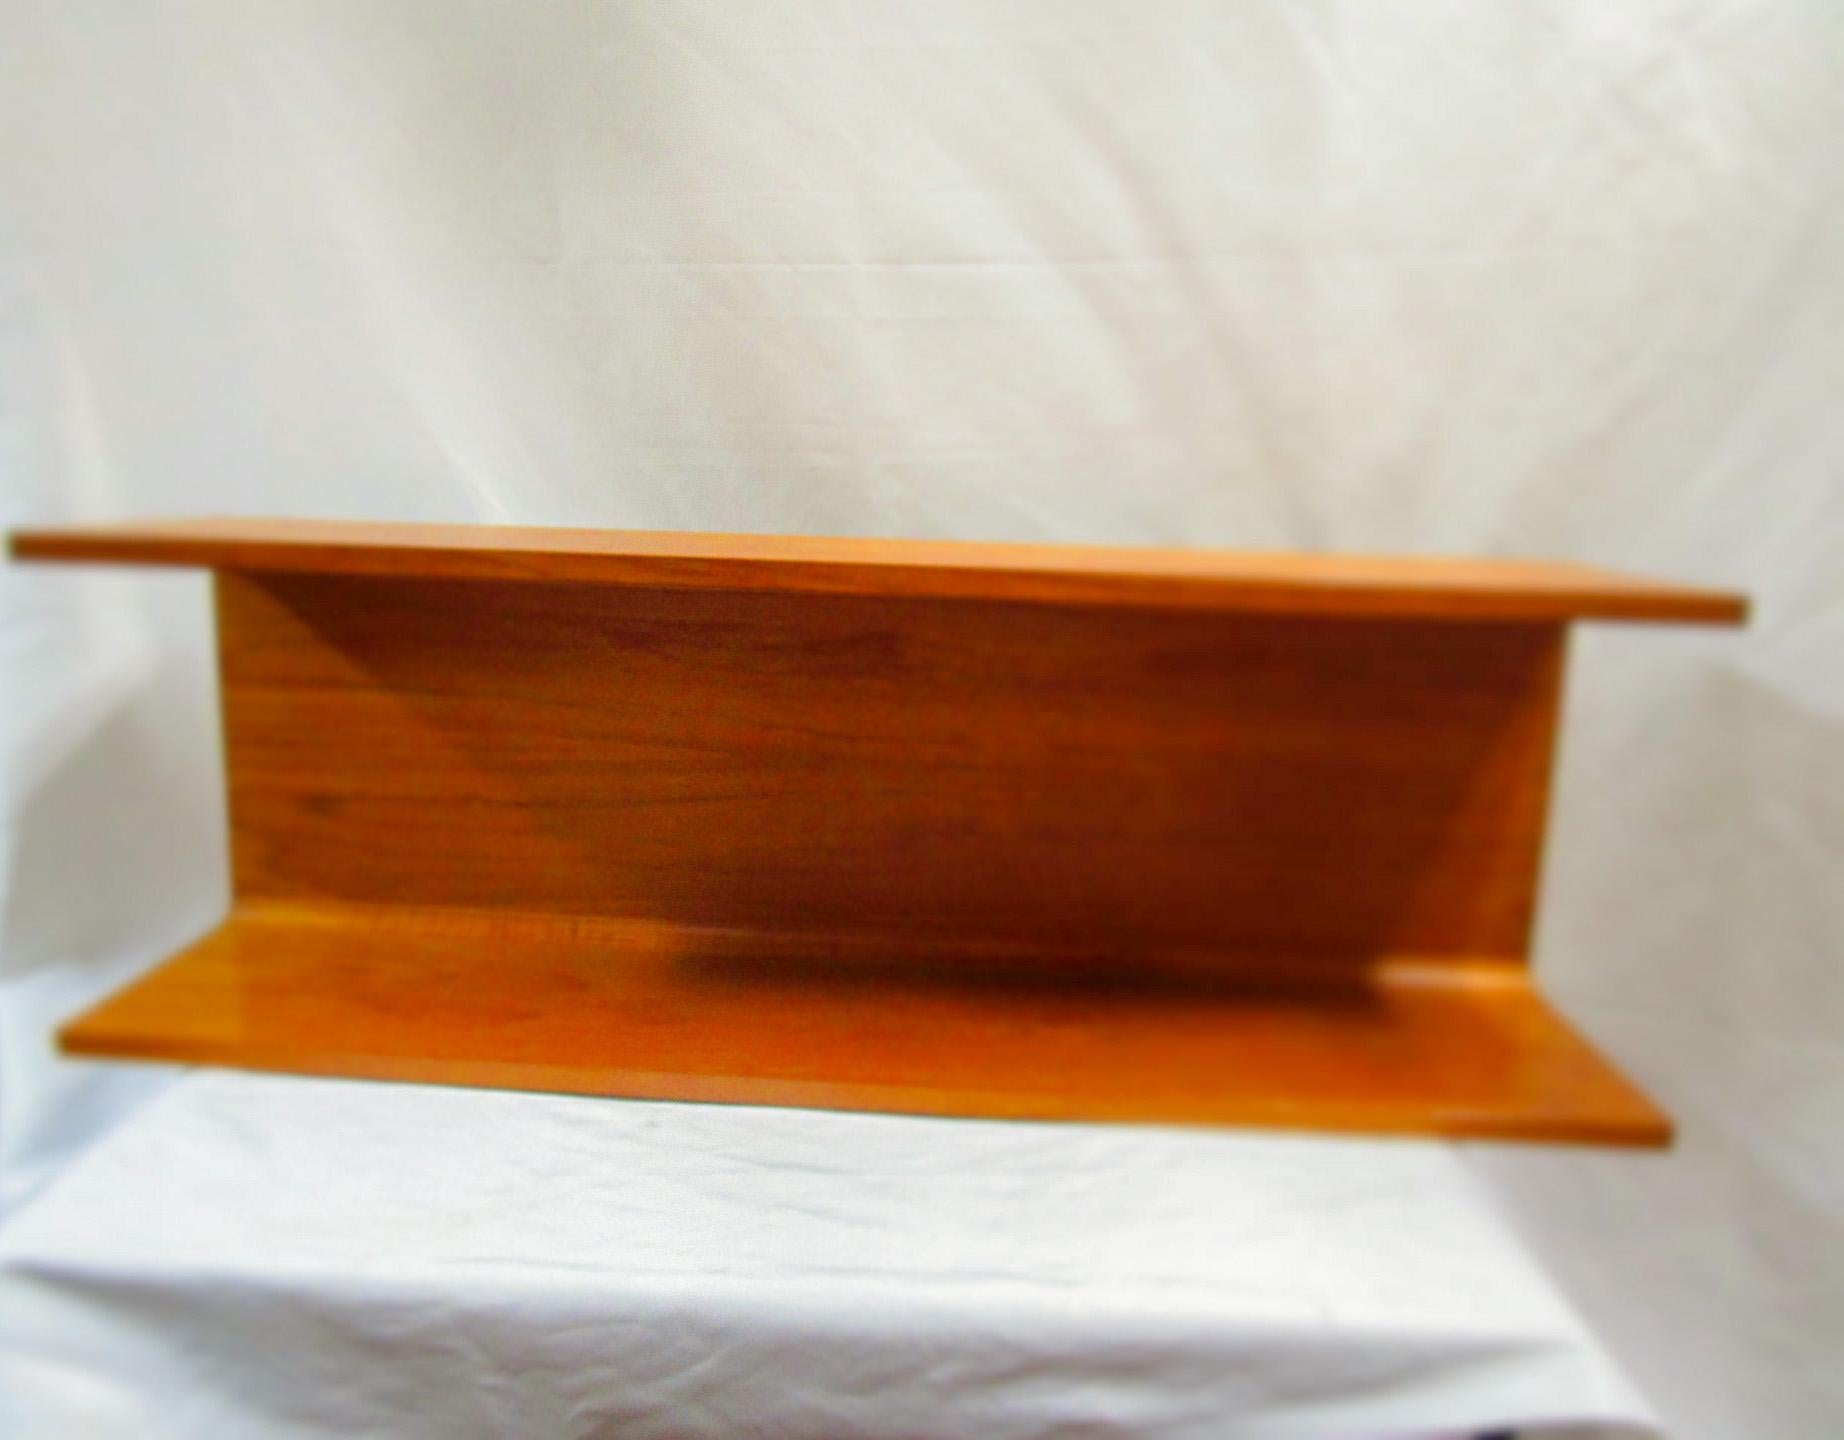 This handsome Pedersen & Hansen teak floating modernist wall shelf is from the Mid-20th Century and has a storage depth of 7.25 inches on bottom- 8.5 inches on top.. Maker’s label on the back- Pedersen & Hansen Viby J. Made in Denmark. Classic